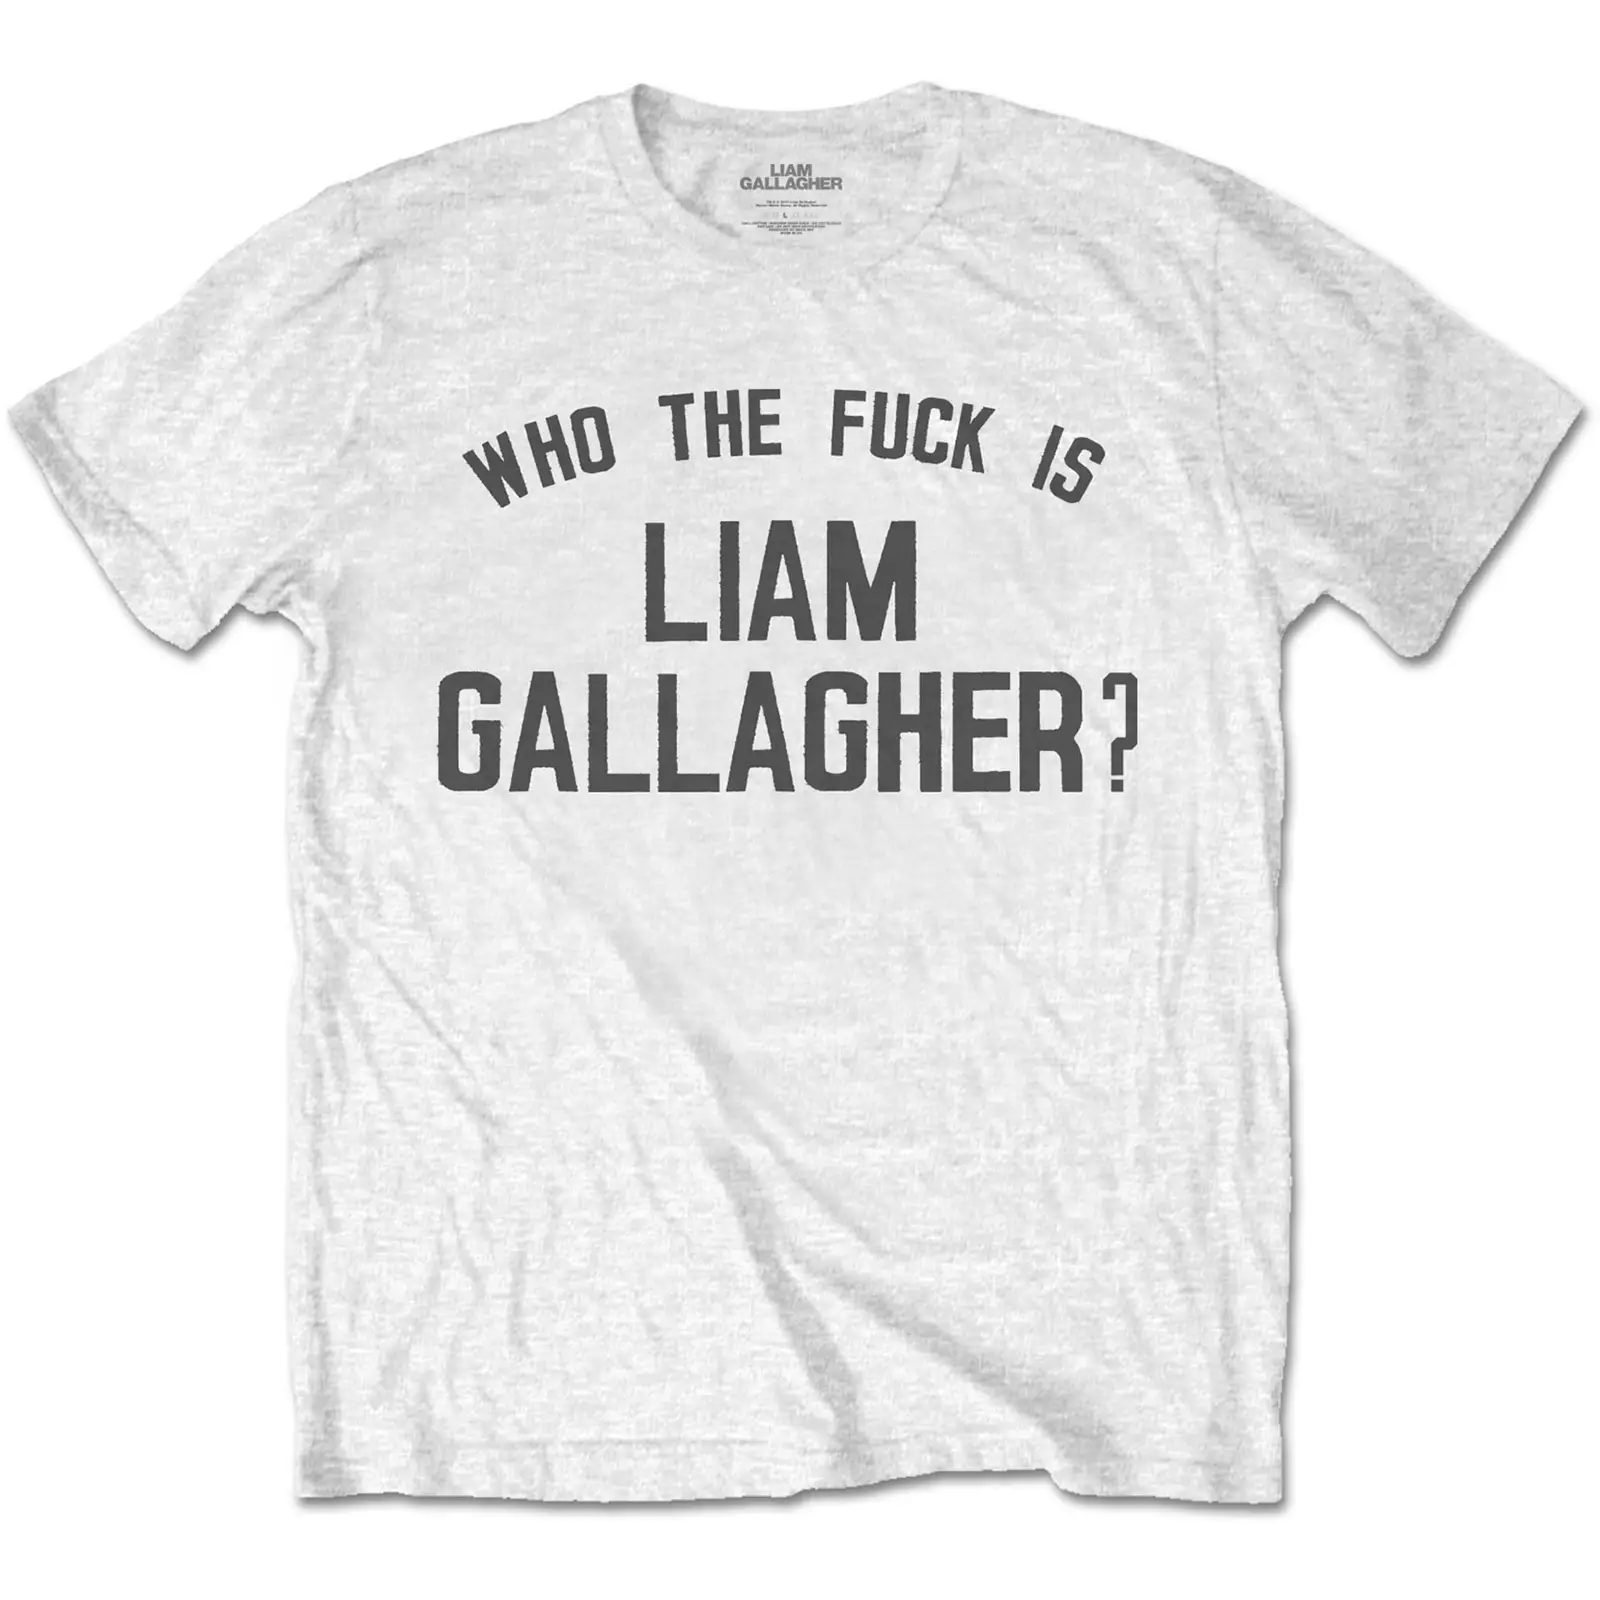 Liam Gallagher - Liam Gallagher Unisex T-Shirt: Who the Fuck…  Who the Fuck… Short Sleeves artwork